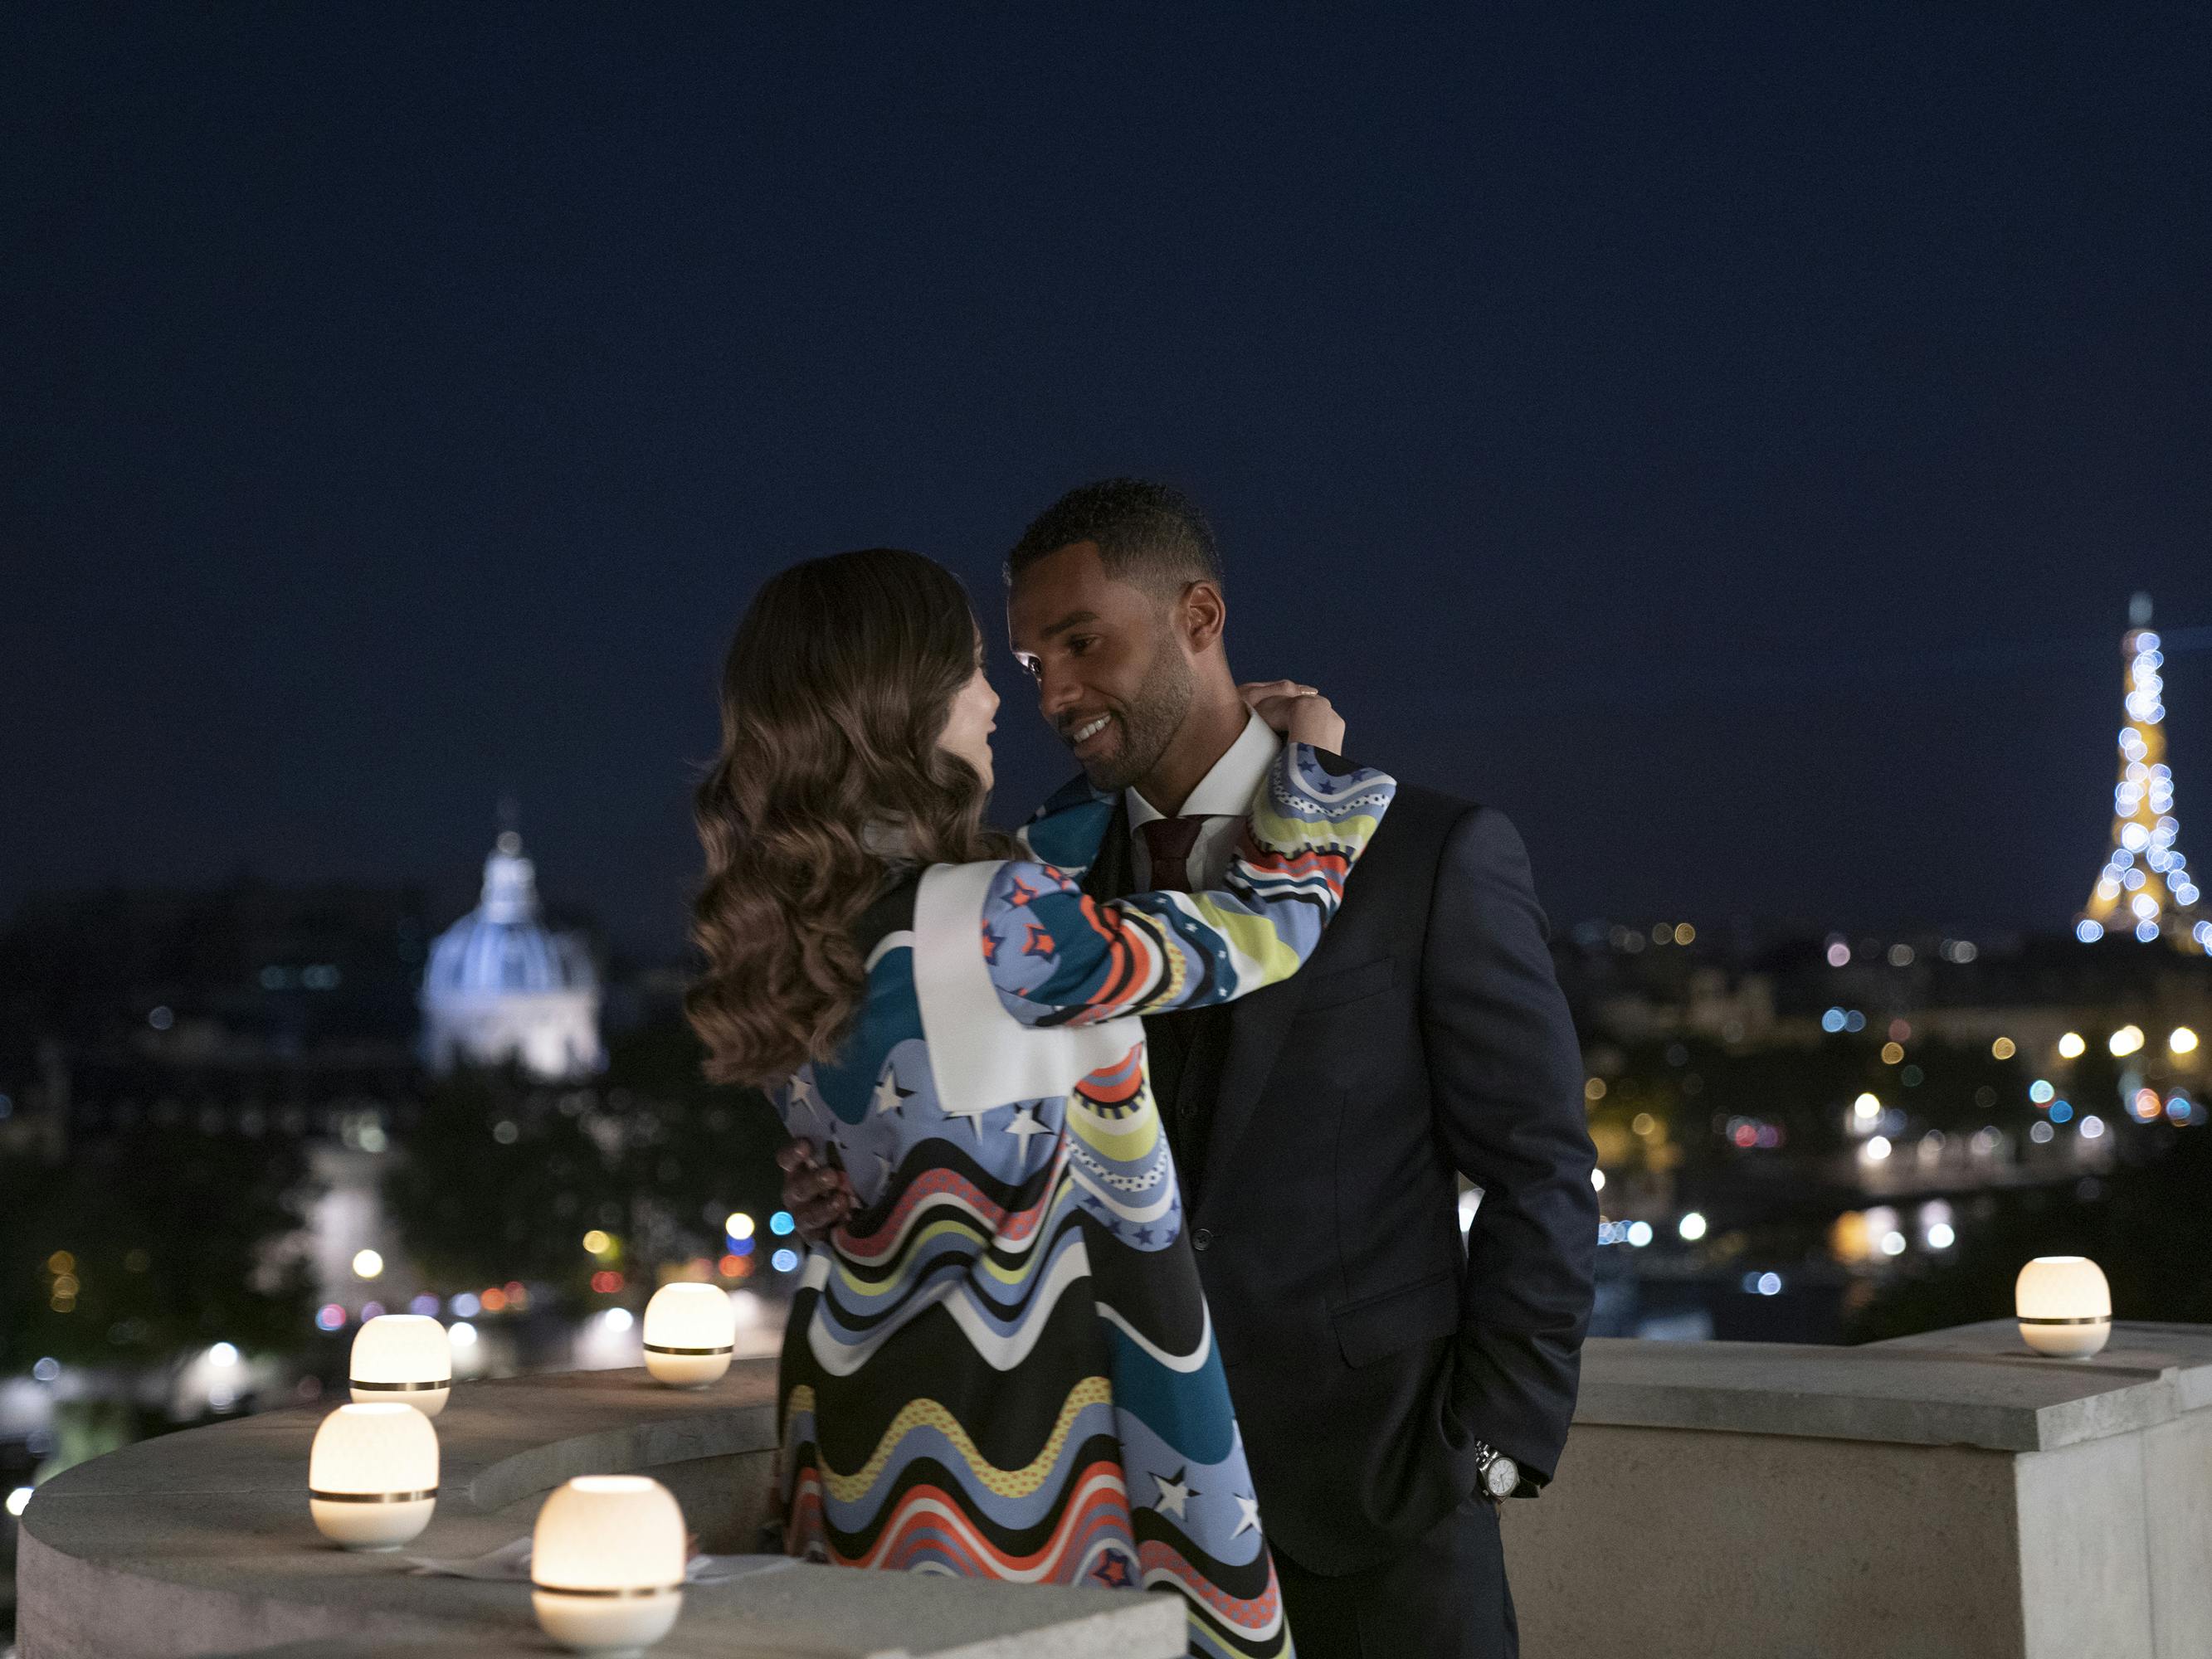 Emily Cooper (Lily Collins) embraces Alfie (Lucien Laviscount) while the Eiffel Tower shimmers in the background. Emily wears a colorful jacket and alfie